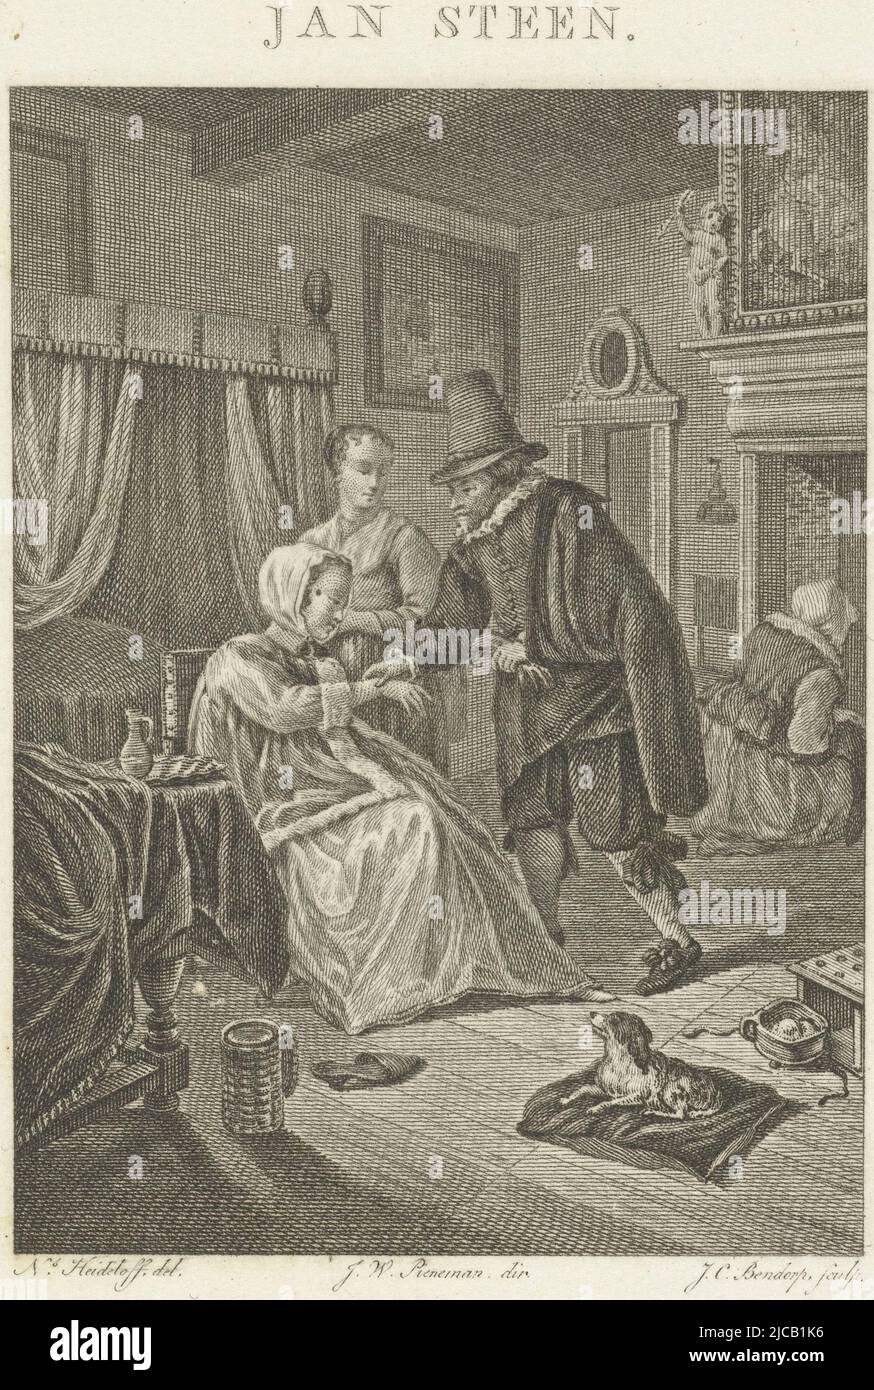 Doctor taking pulse of sick woman in Jan Steen's bedroom , print maker: Johannes Christiaan Bendorp, (mentioned on object), intermediary draughtsman: Nicolaus Heideloff, (mentioned on object), after: Jan Havicksz. Steen, (mentioned on object), Netherlands, 1776 - 1819 and/or 1819, paper, etching, h 104 mm × w 76 mm Stock Photo